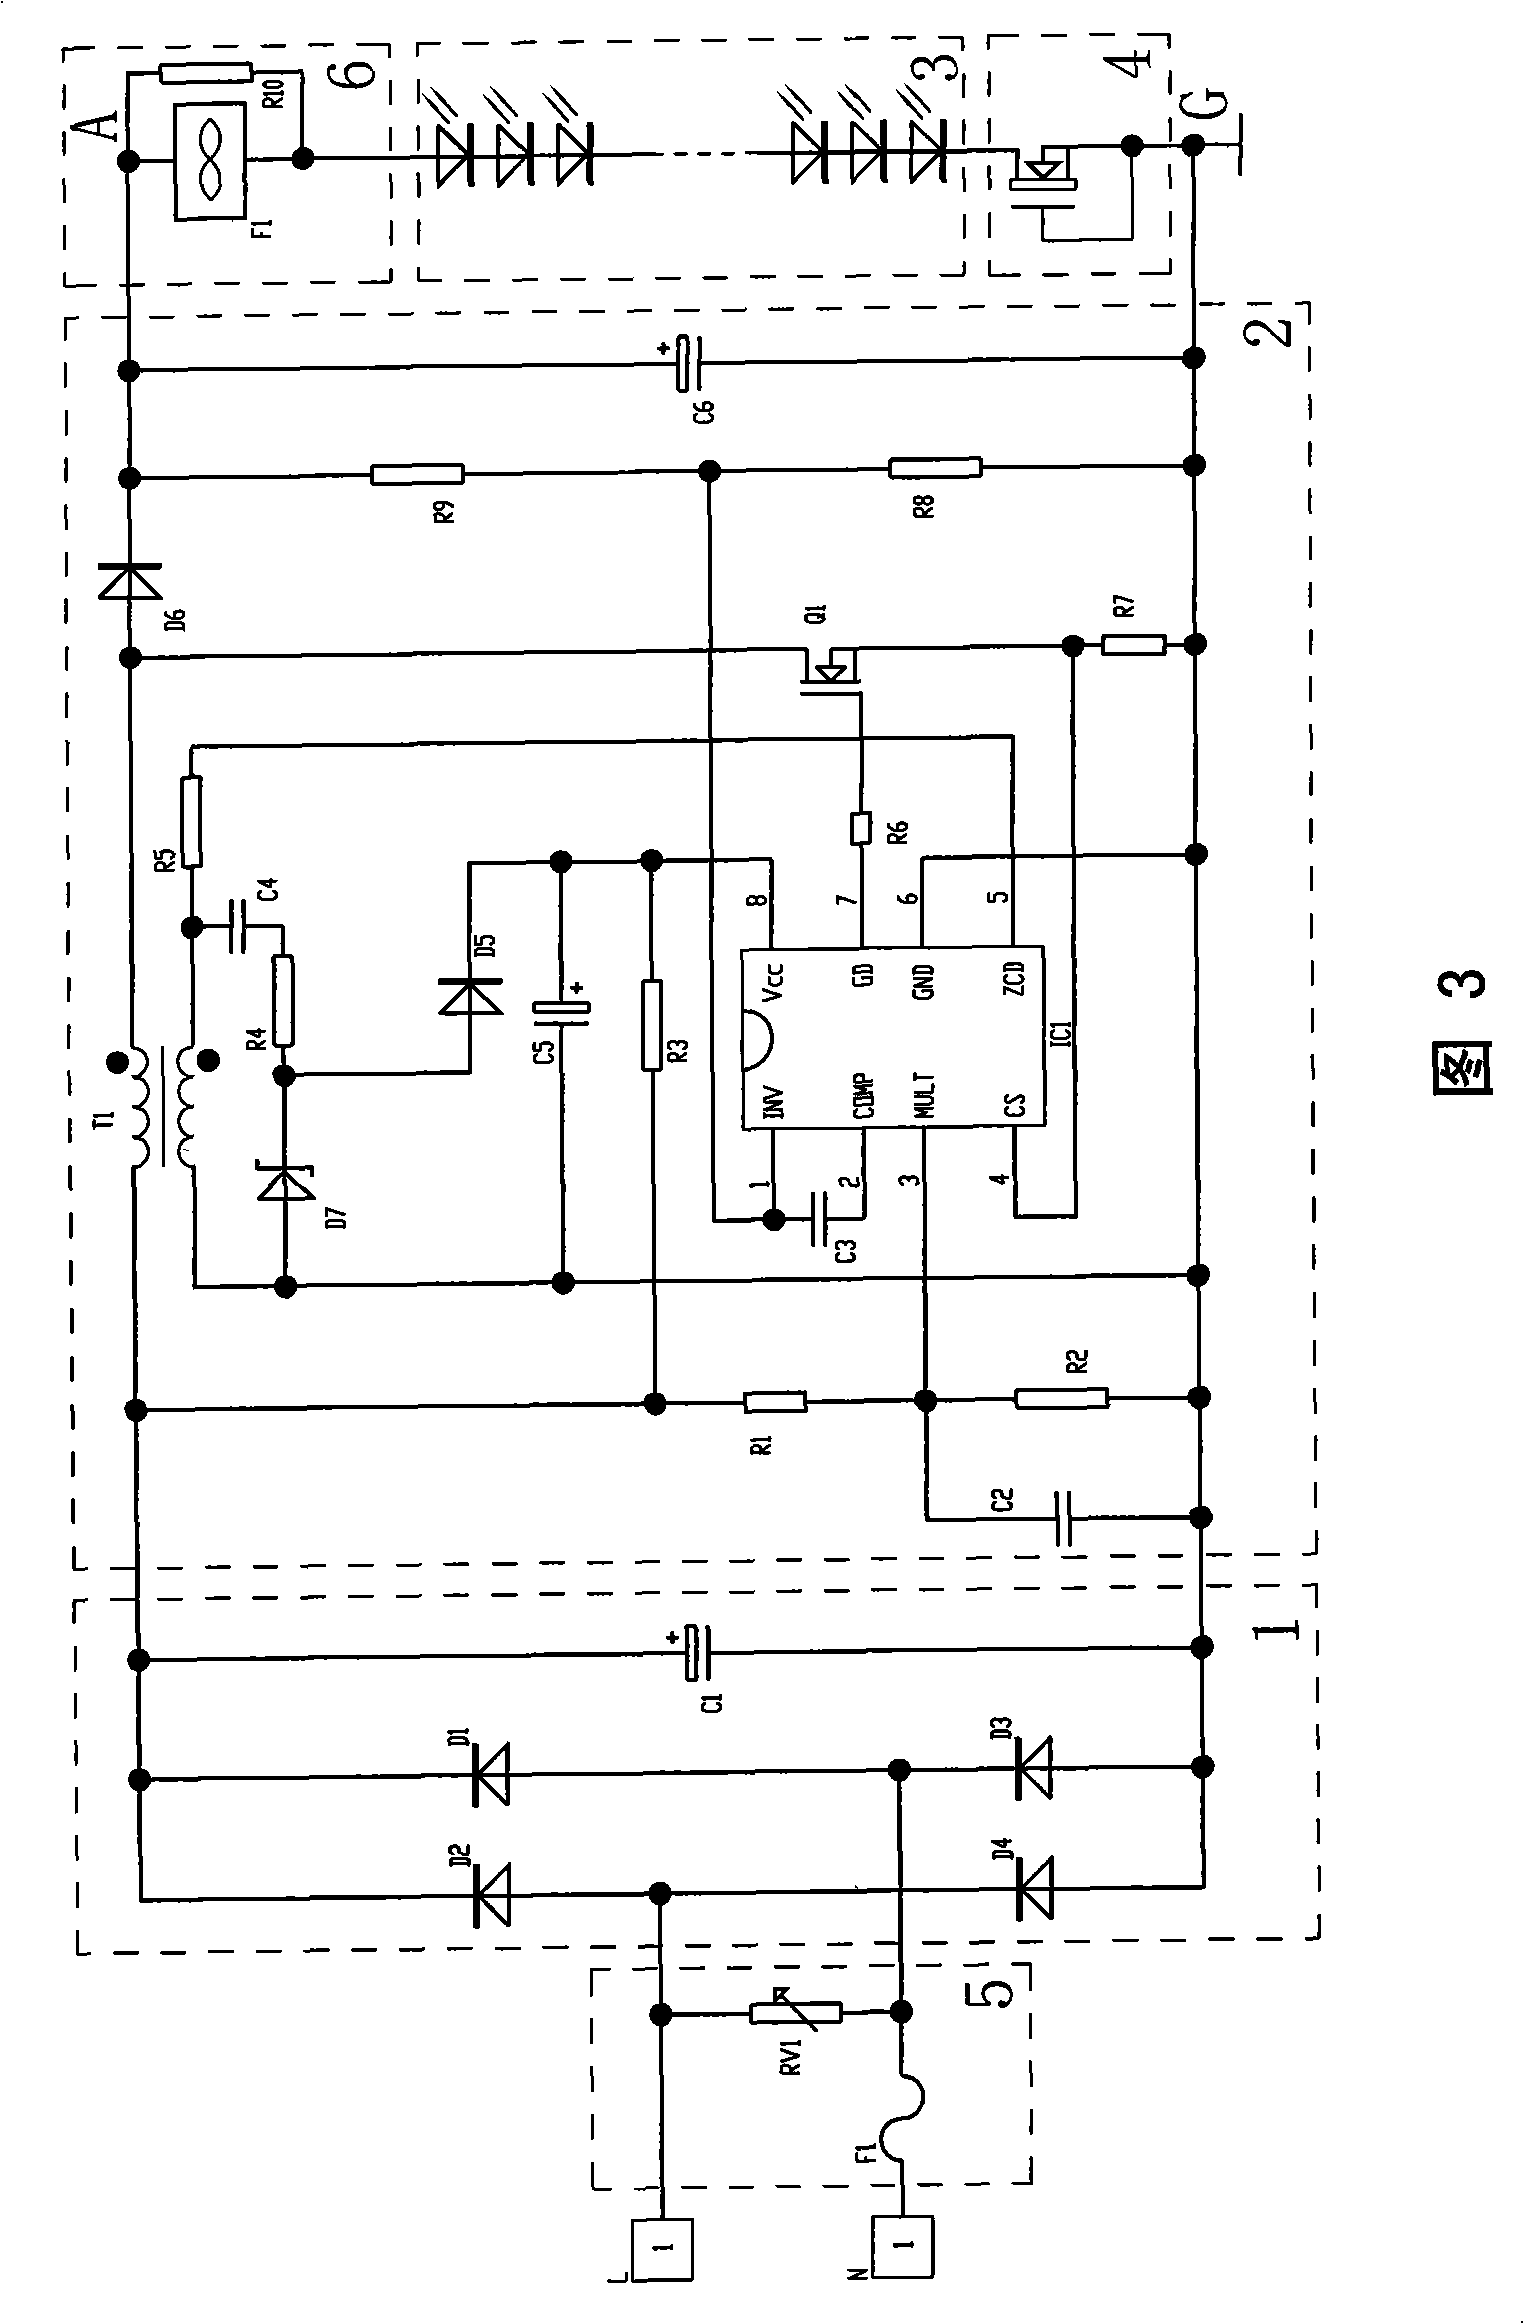 High-power LED lamp circuit with fan